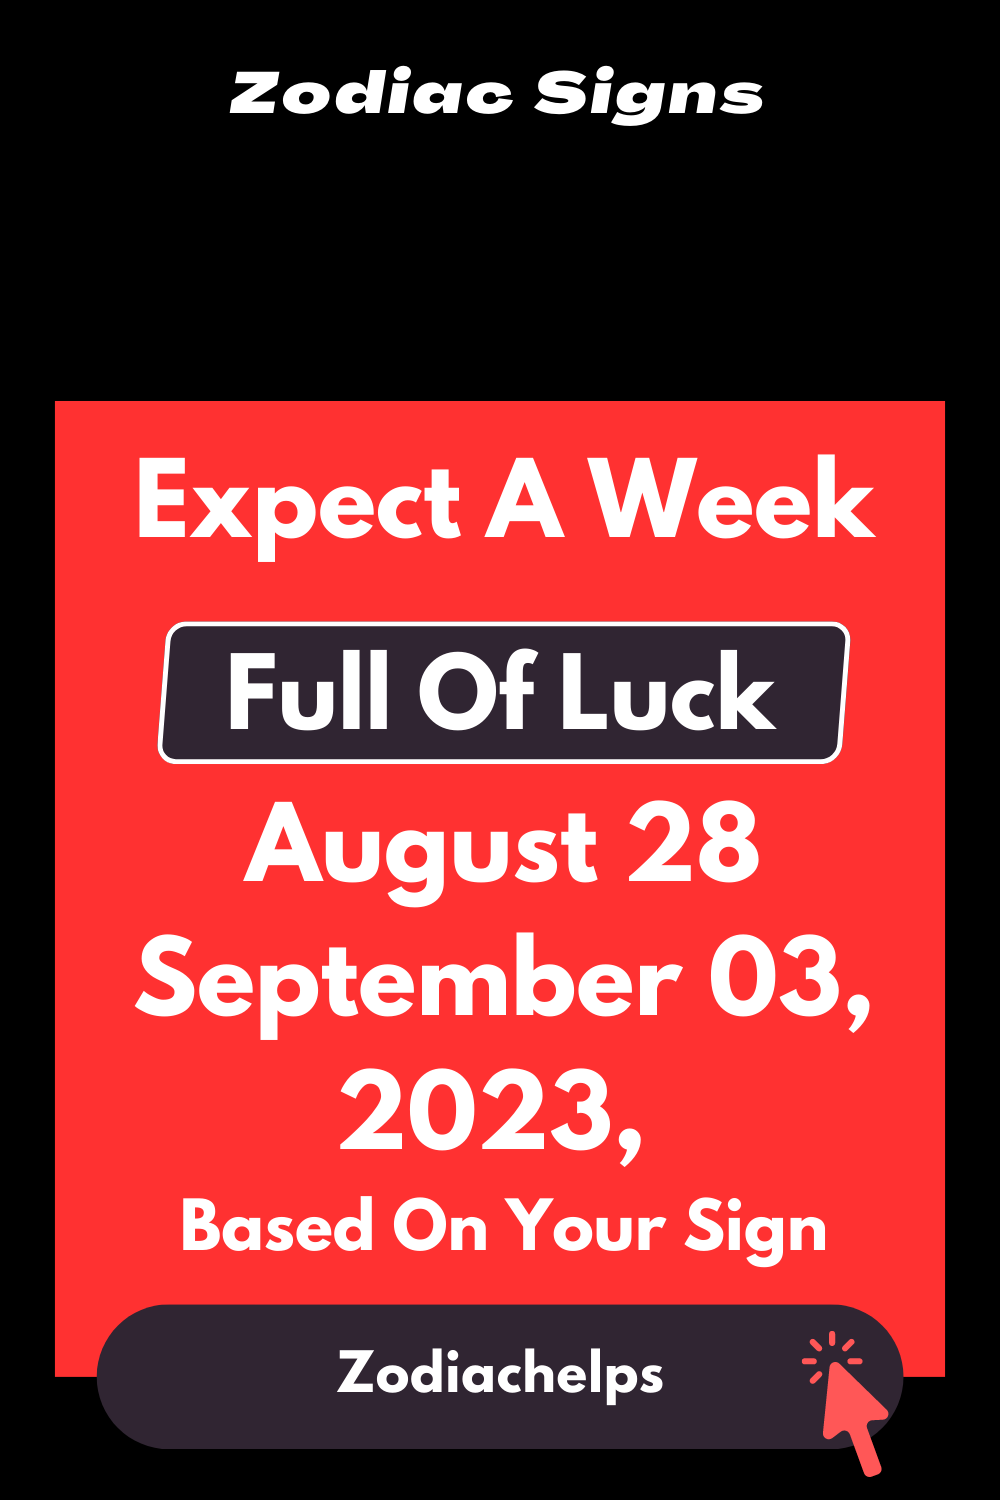 Expect A Week Full Of Luck August 28 September 03 2023, Based On Your Sign